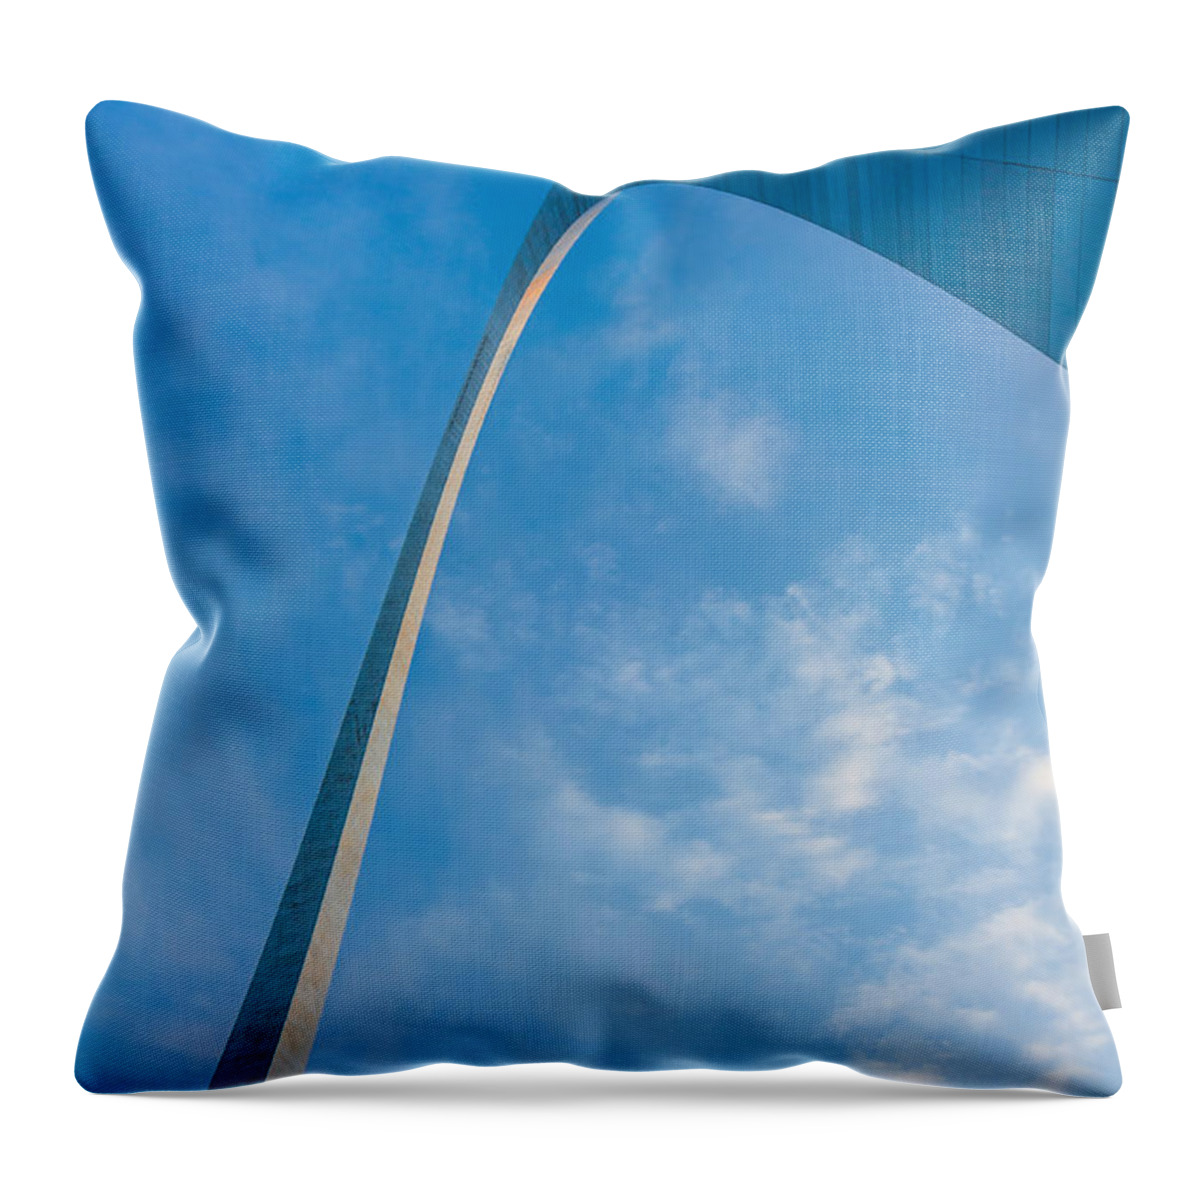 Abstract Throw Pillow featuring the photograph The Gateway Arch by Semmick Photo